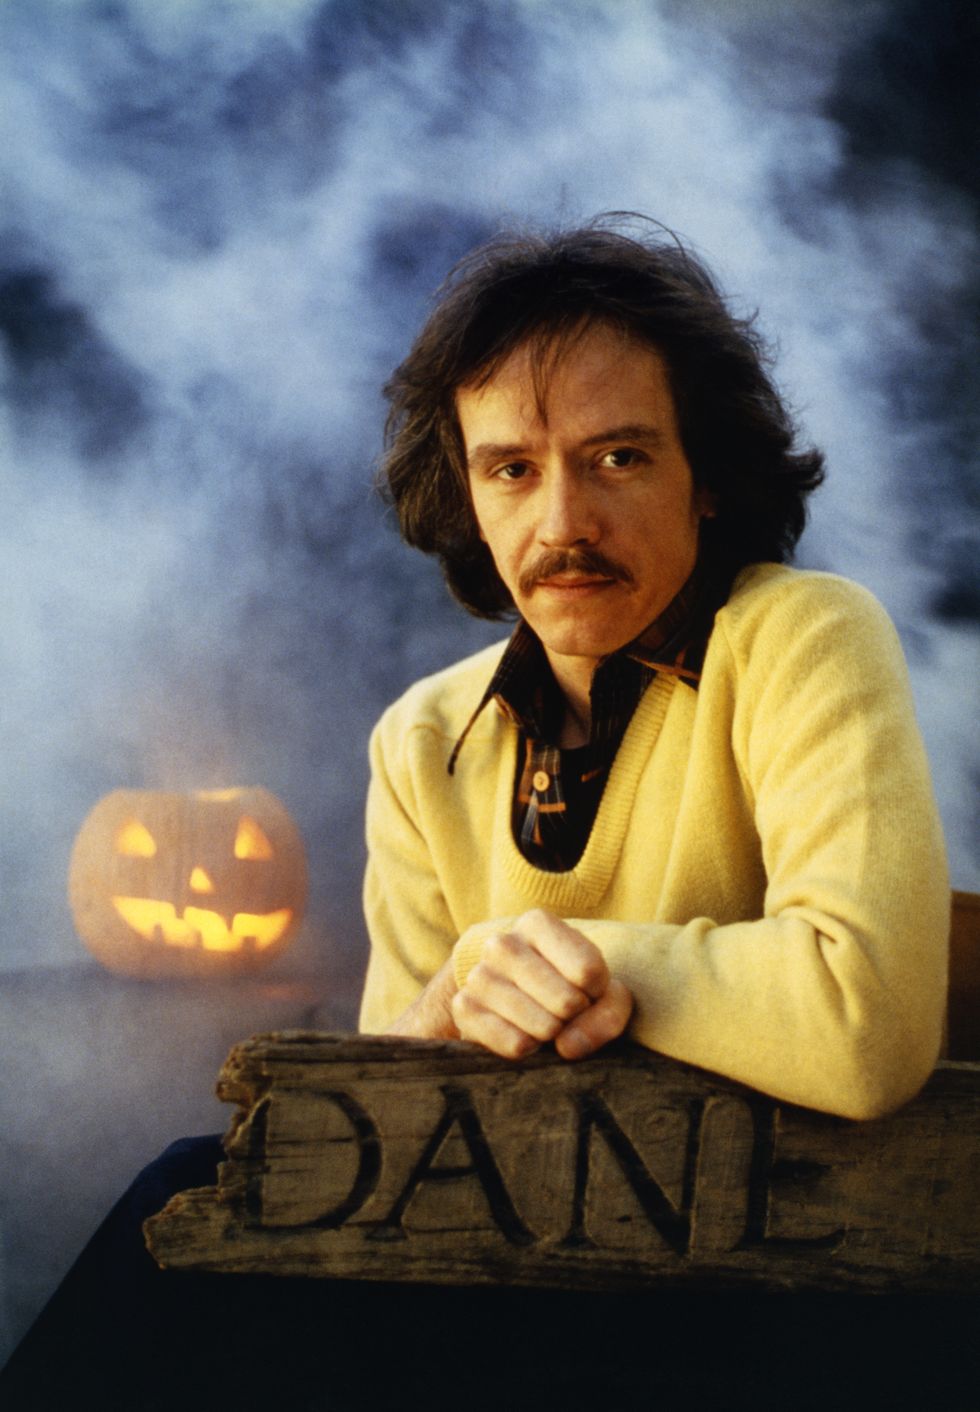 American director and screenwriter John Carpenter on the set of his movie Halloween. (Photo by Compass International Pictures/Sunset Boulevard/Corbis via Getty Images)